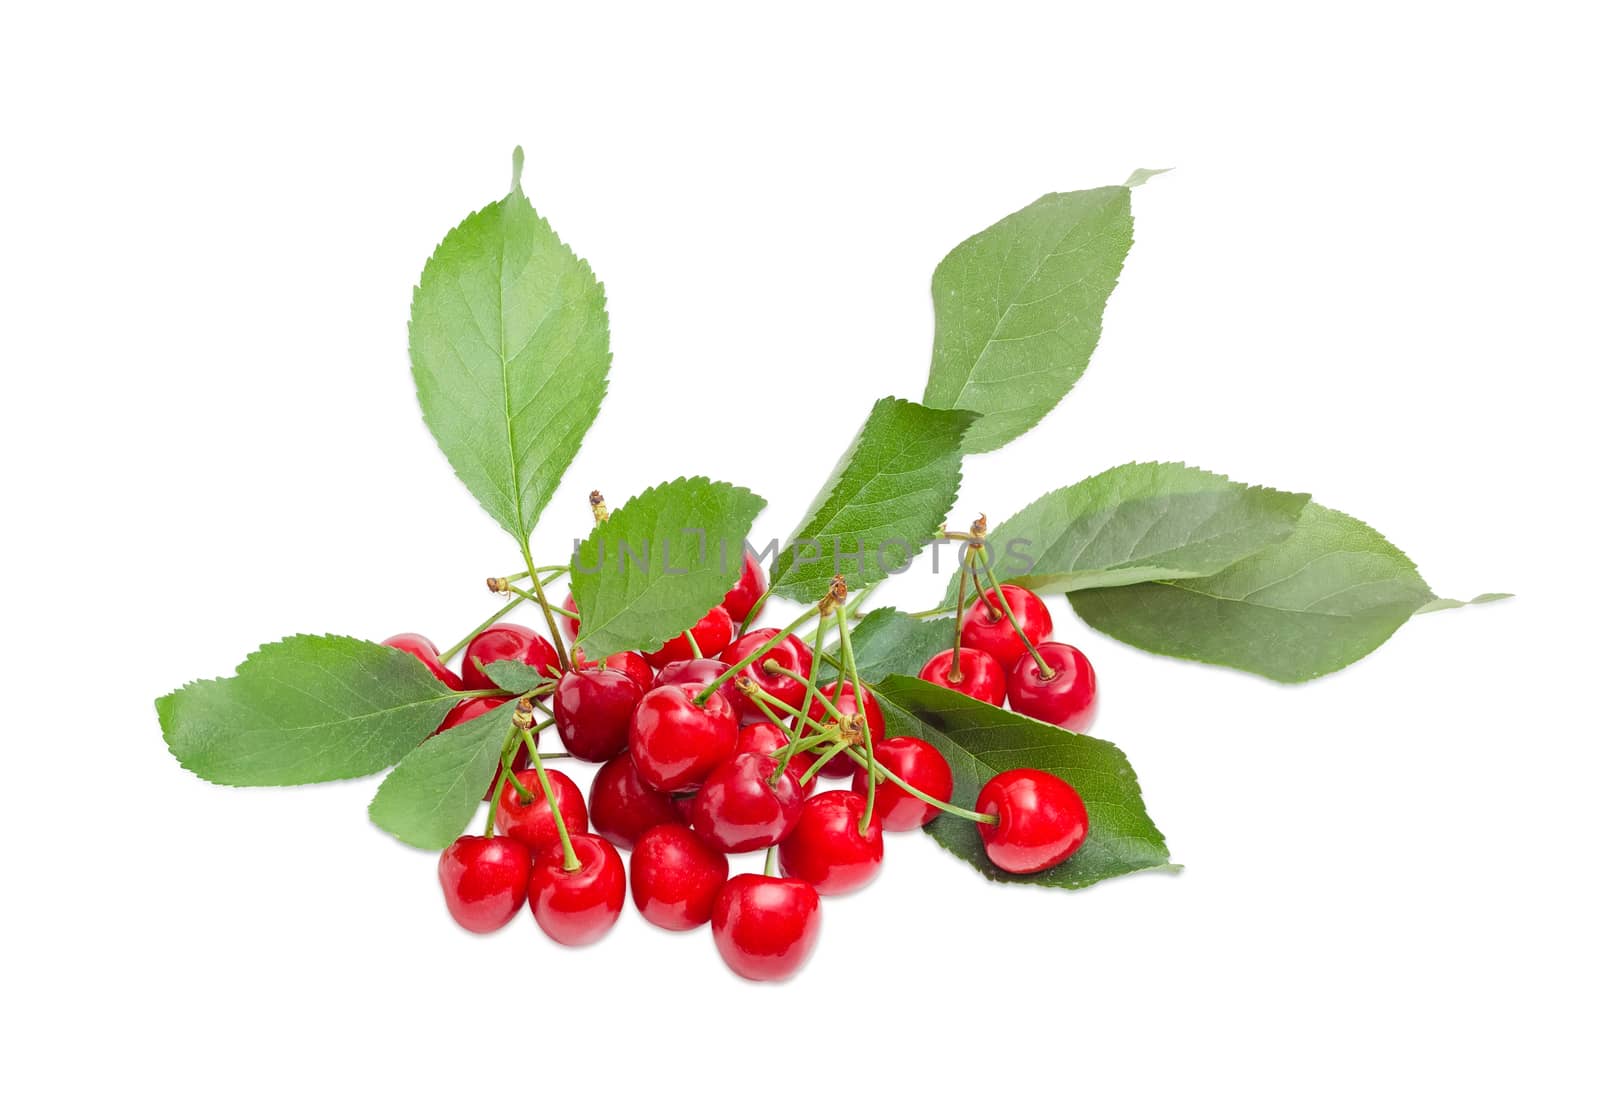 Pile of the ripe sweet cherries with the stalks and leaves on a light background
